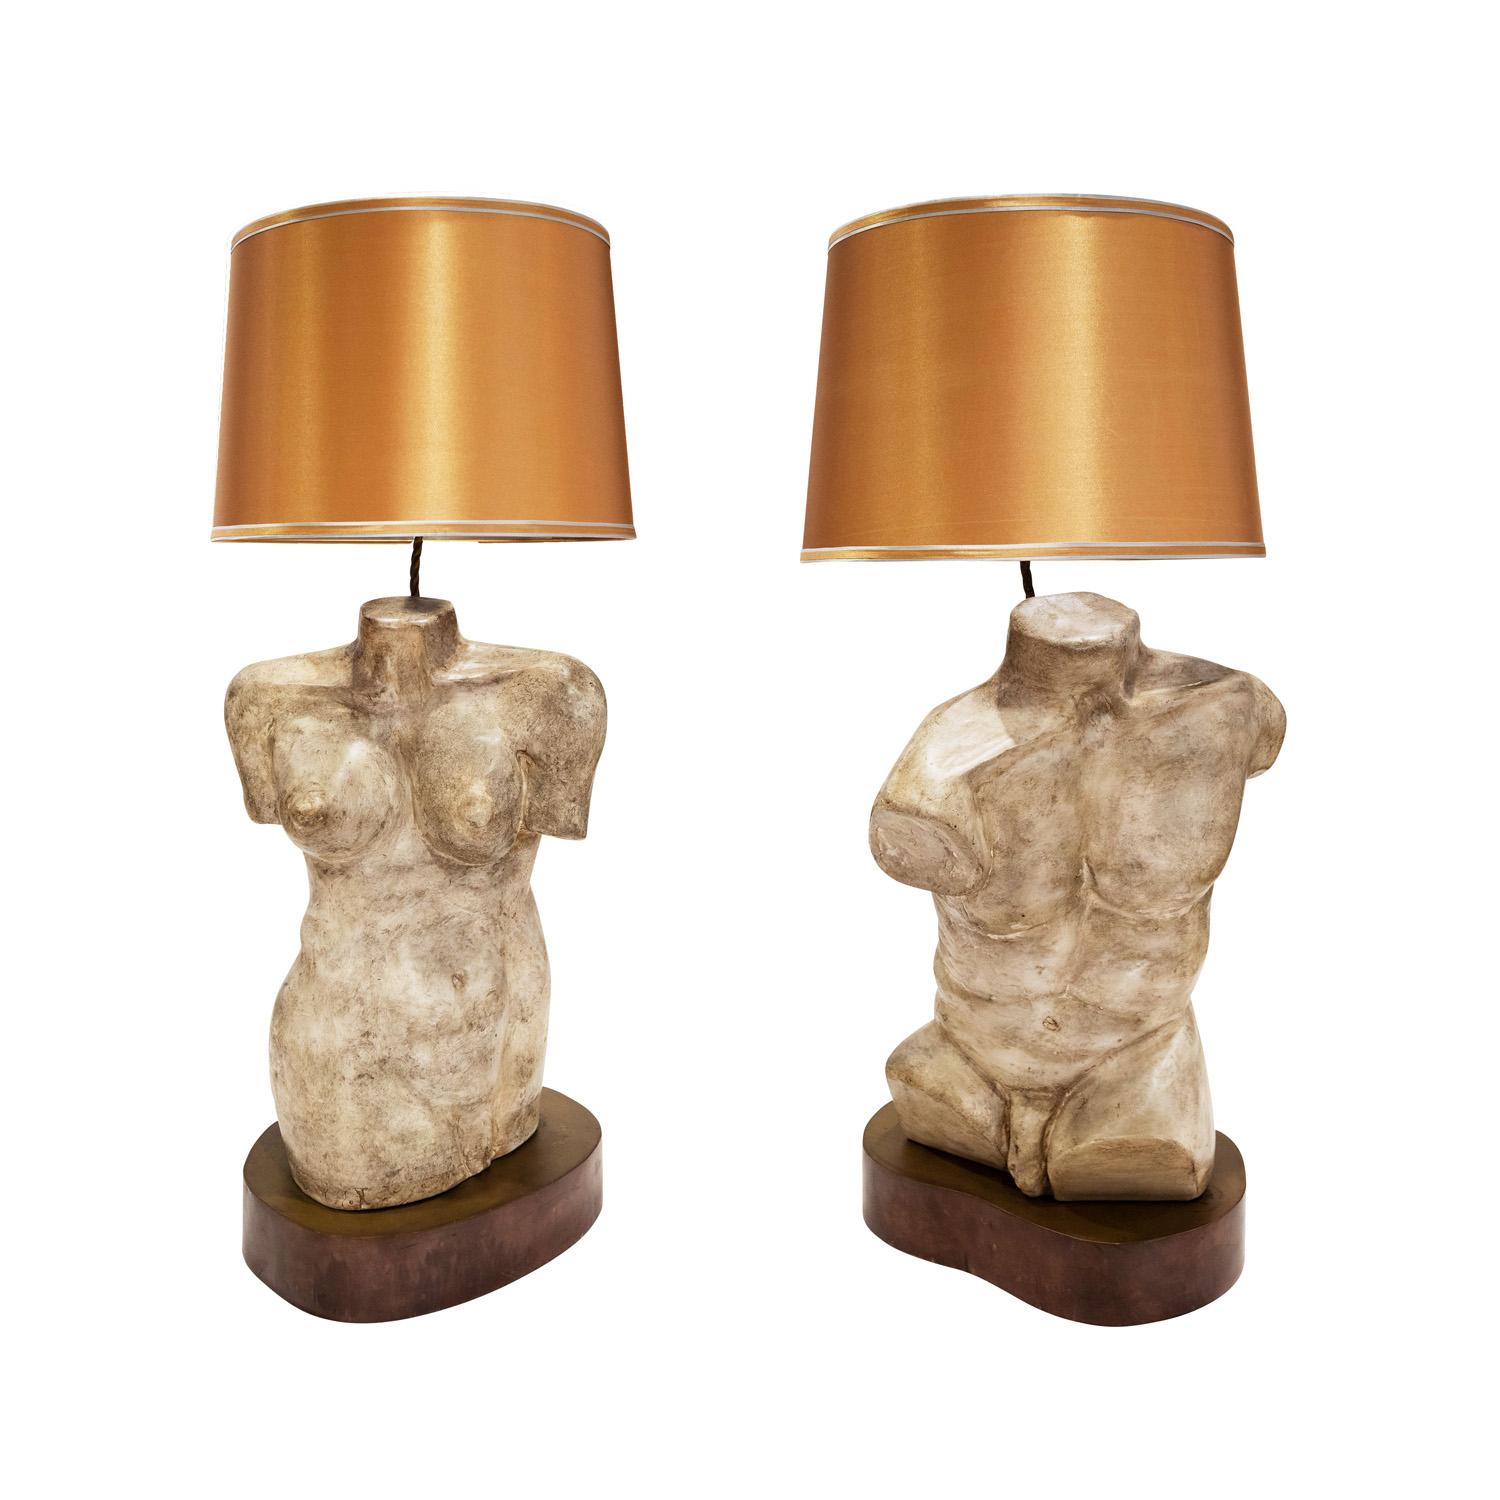 Rare and important male and female torso table lamps in Hydro Stone plaster on patinated bronze bases by Philip & Kelvin LaVerne, American ca. 1970 (signed 